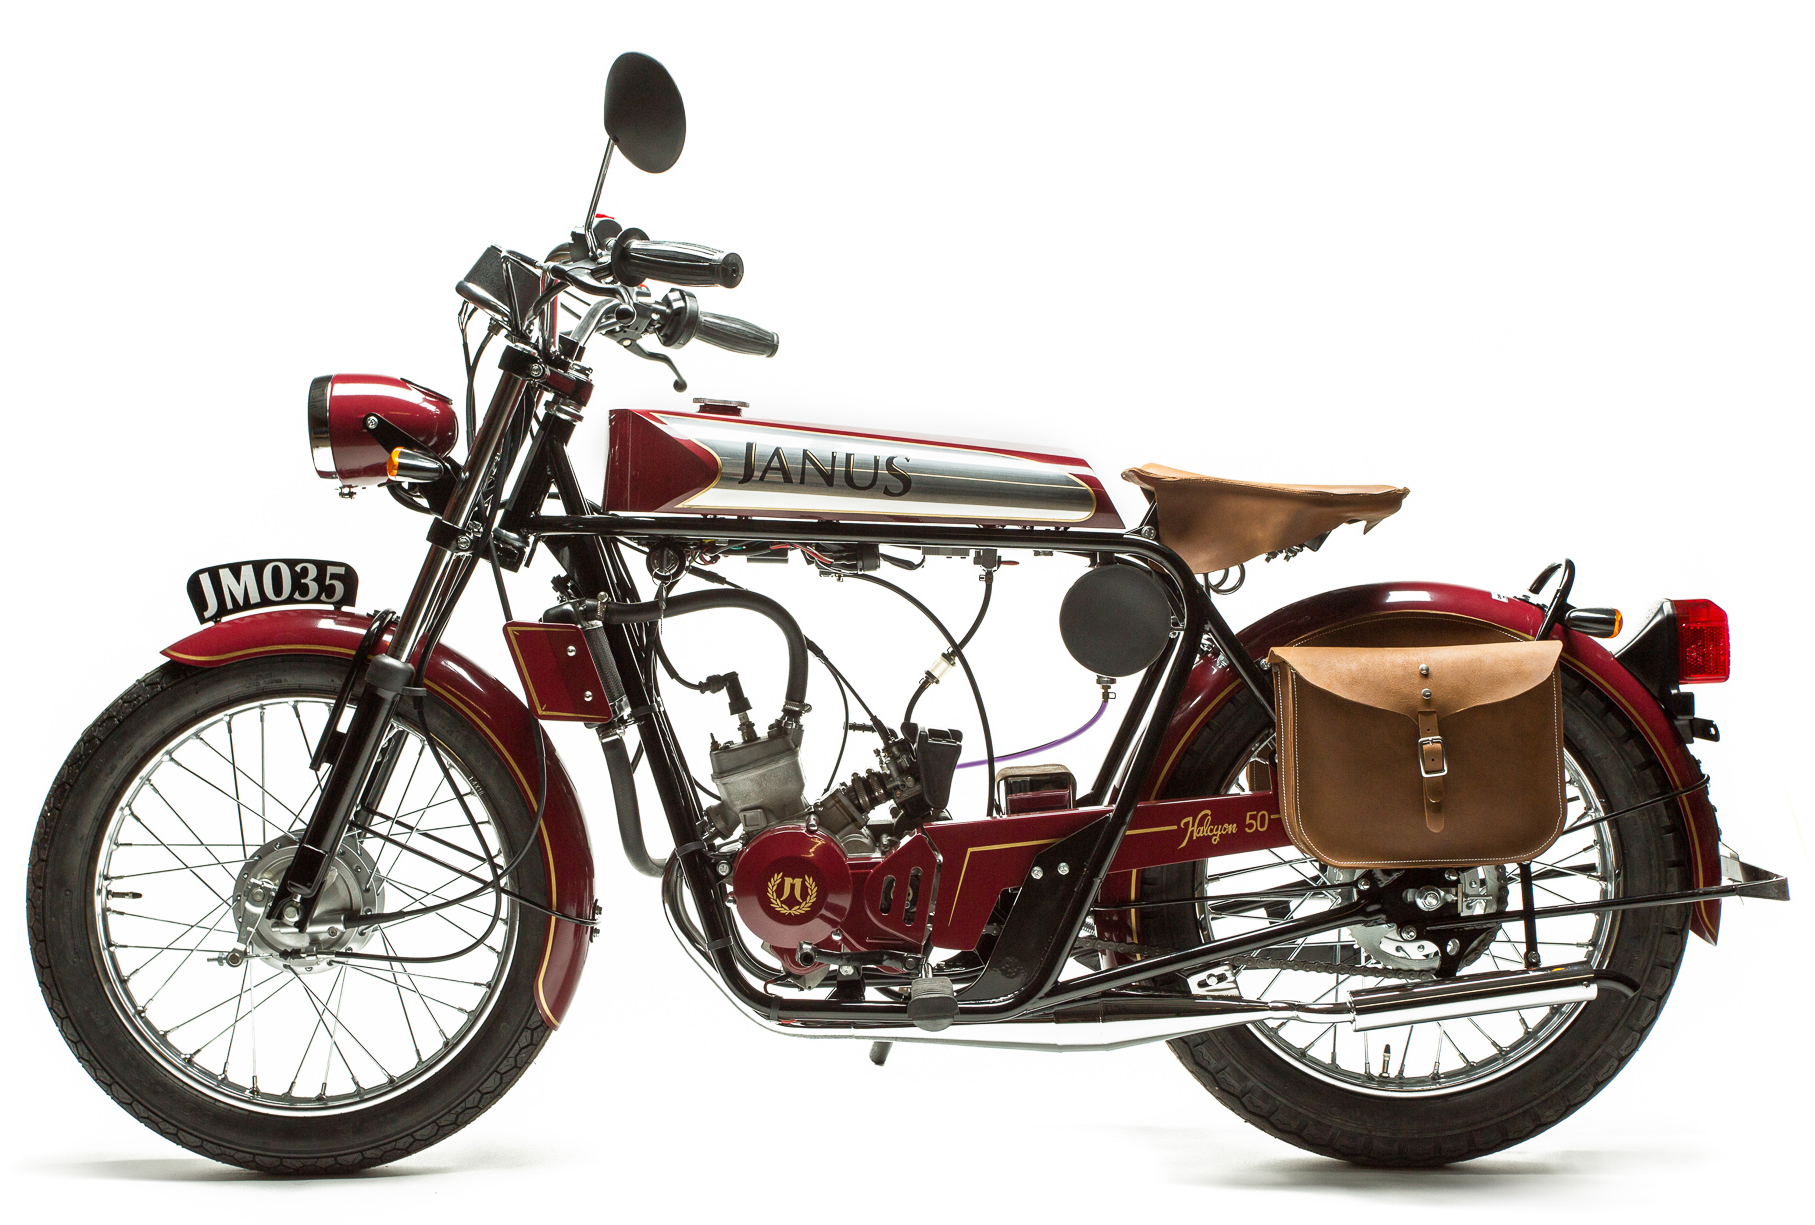 Small States: Janus Motorcycles takes pride in its hand-crafted and